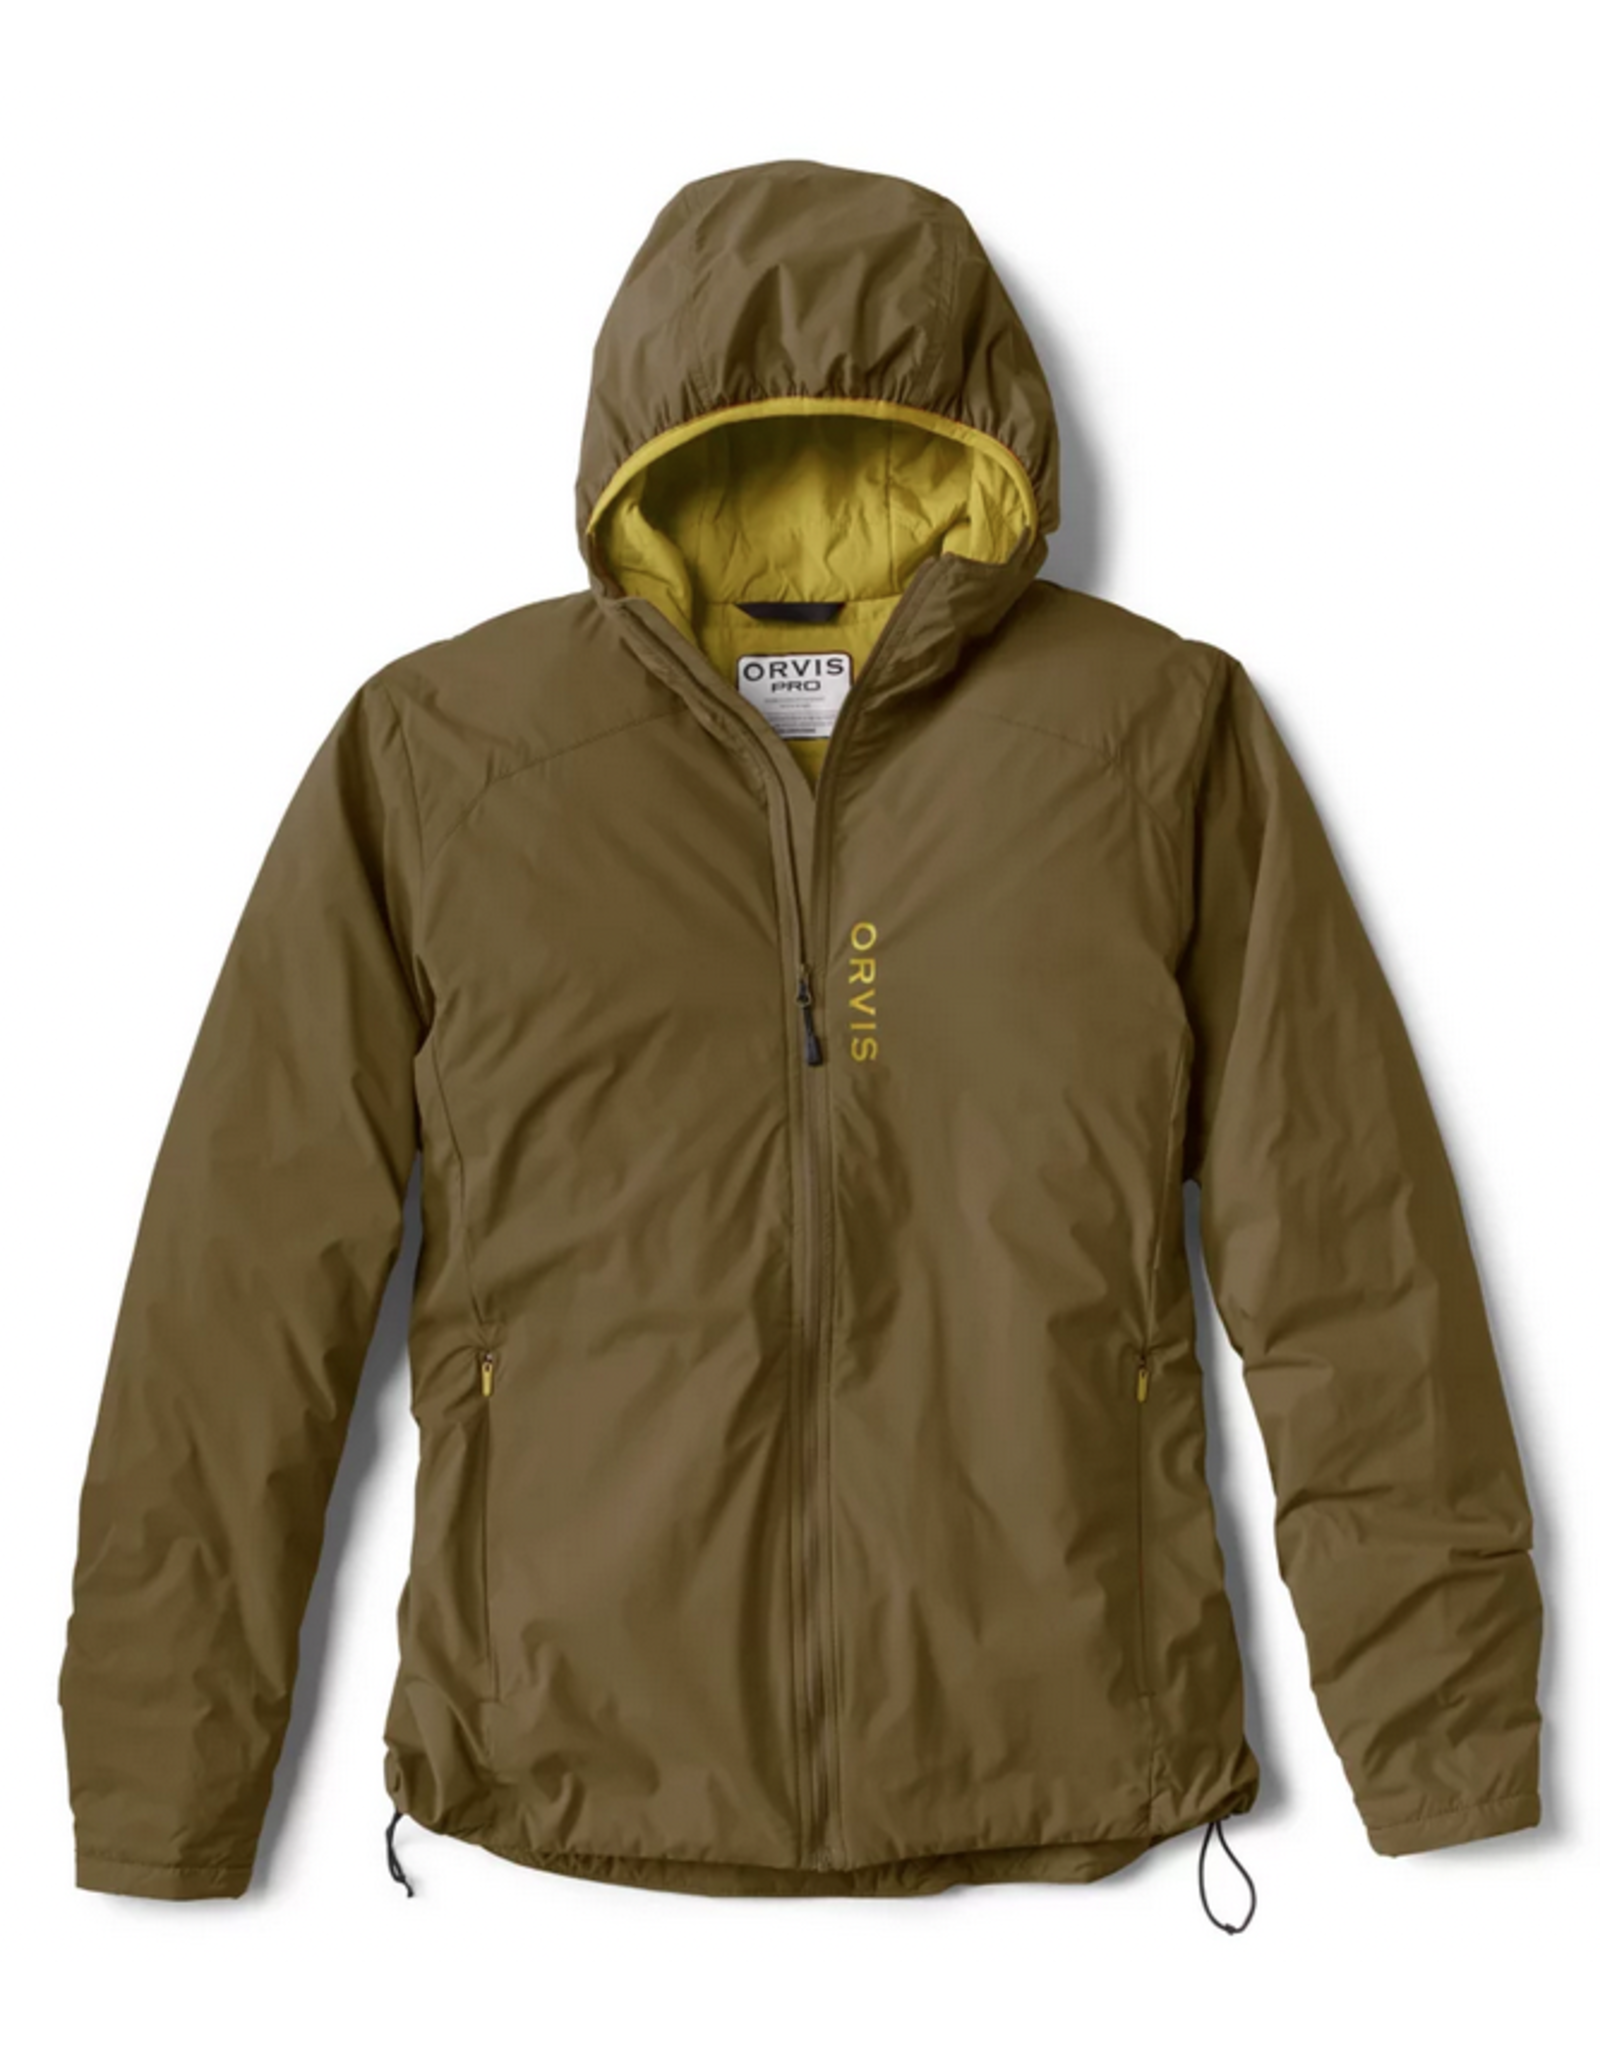 ORVIS Pro LT Insulated Hoodie - Royal Gorge Anglers